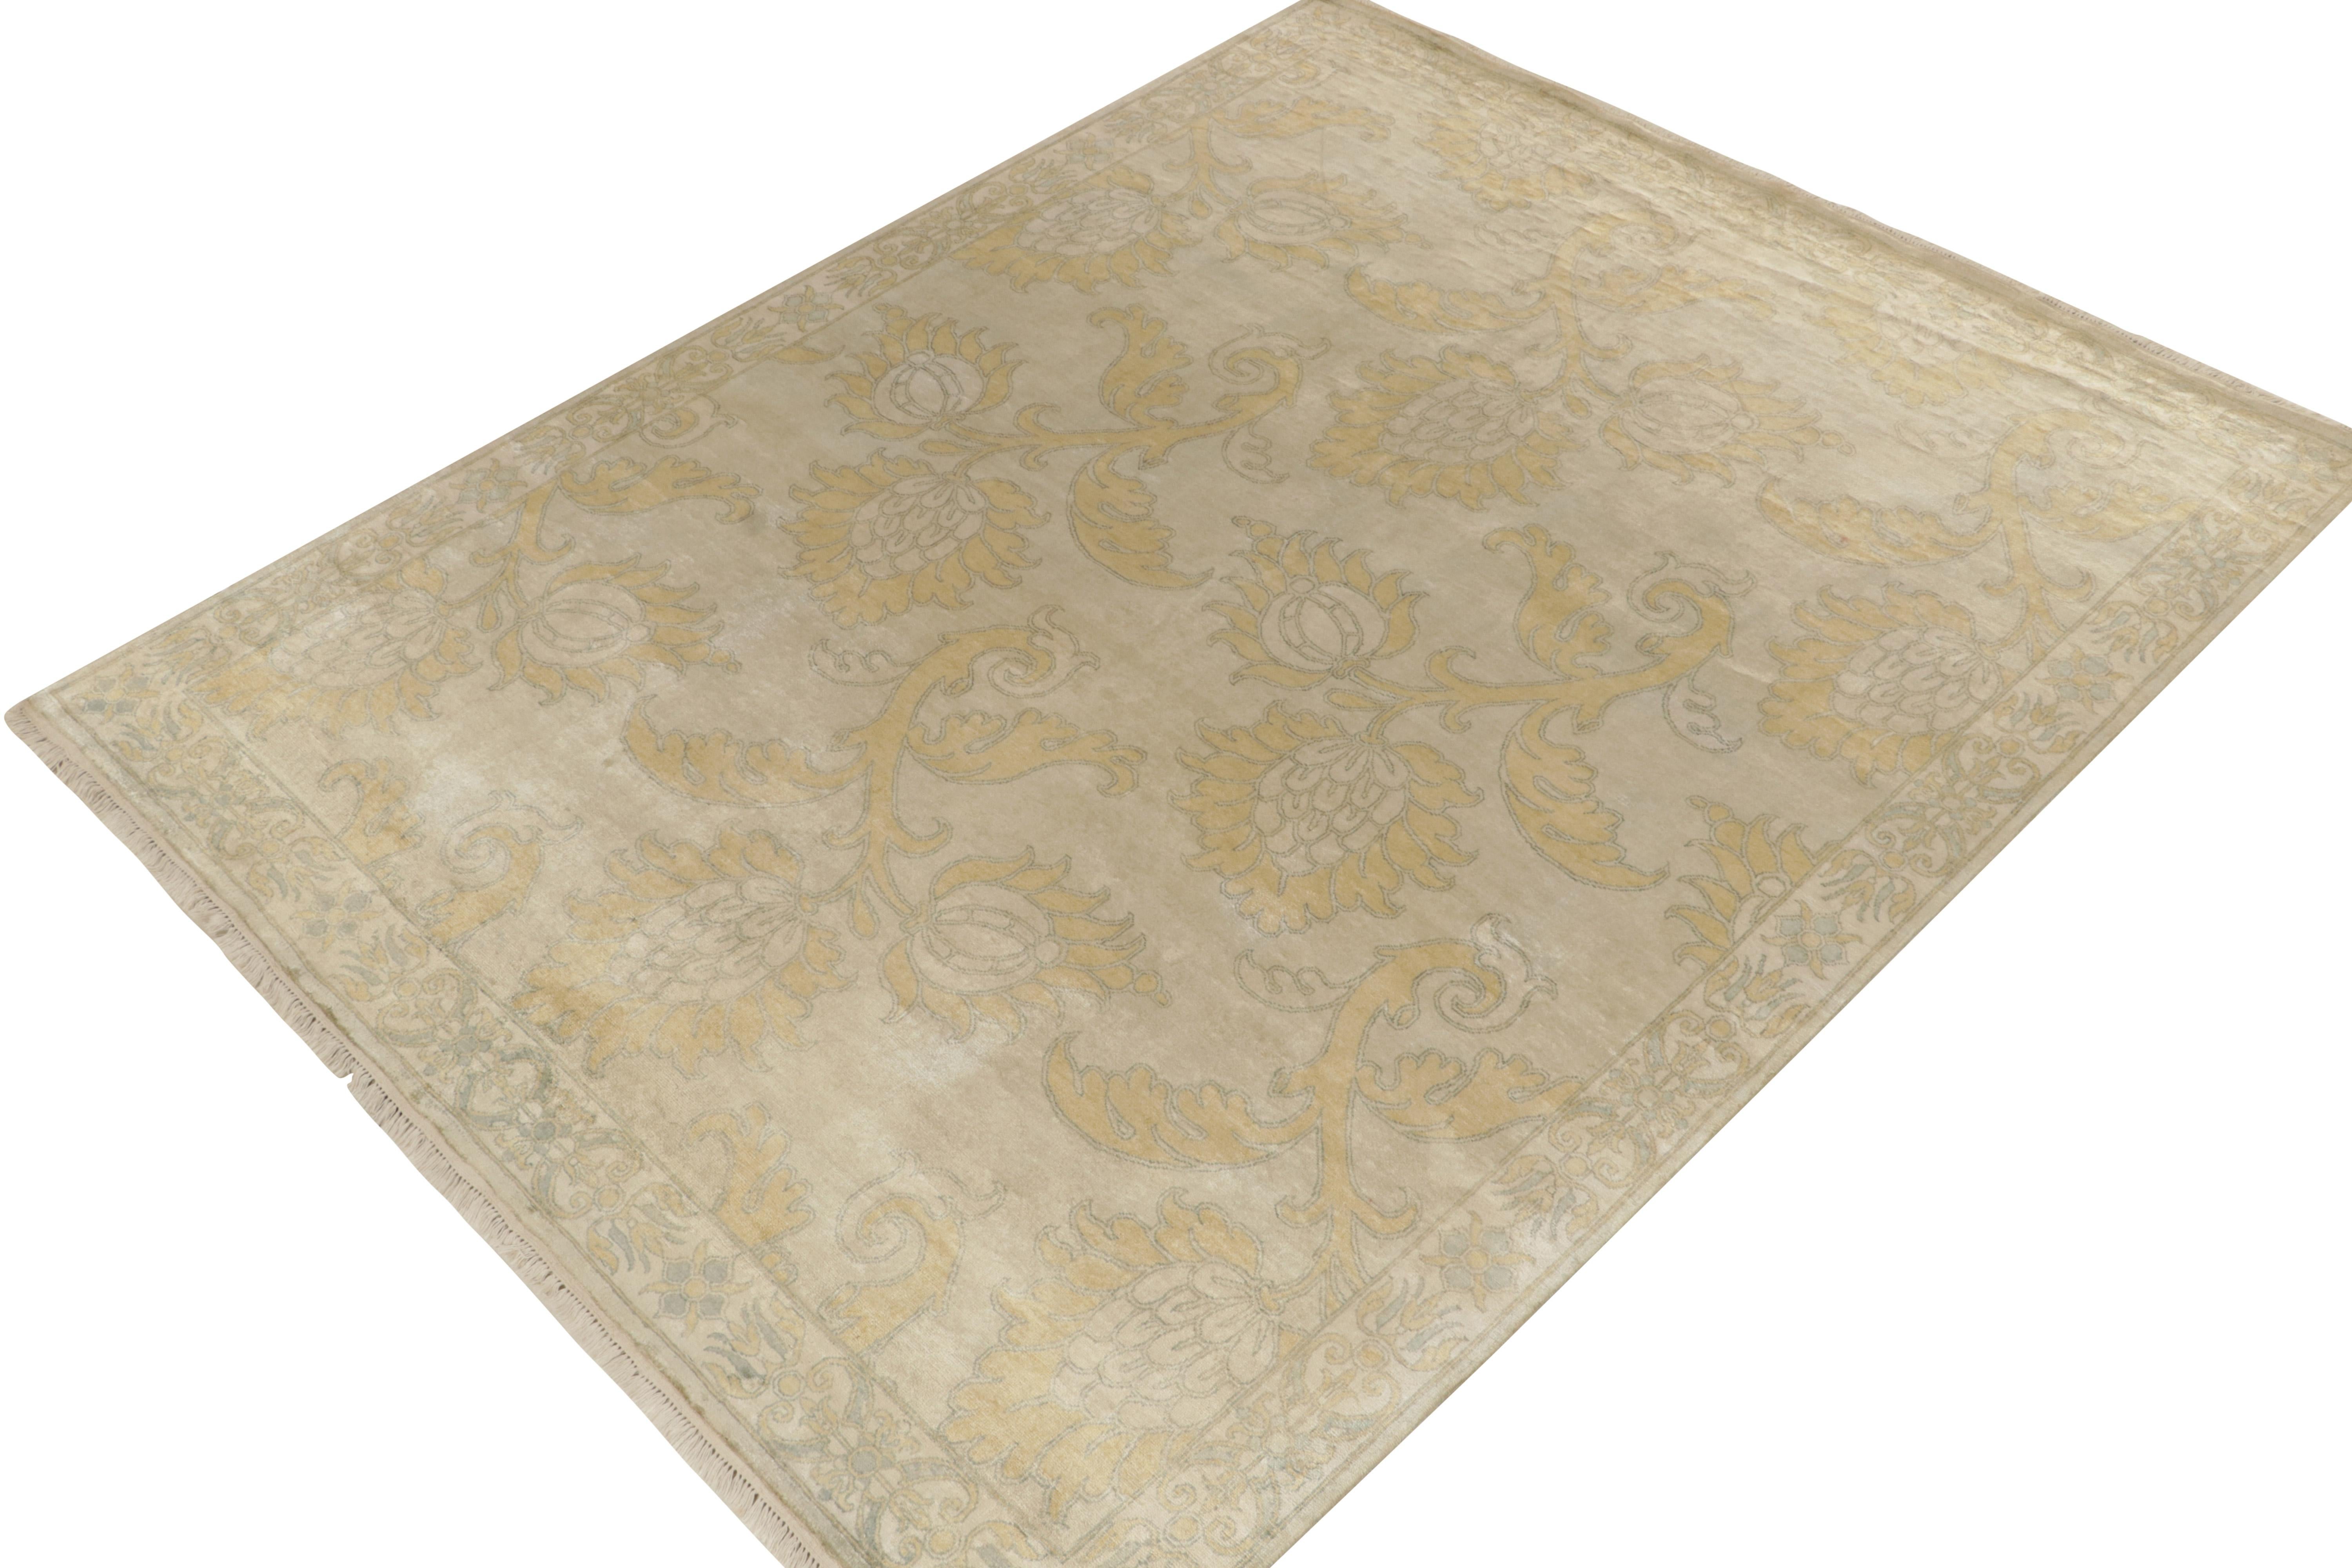 Hand-knotted in all silk, this 8x10 from our Modern Classics collection is an ode to rare European rug styles. 

On the Design: The drawing favors asymmetric floral patterns in forgiving tan with regal blue and gold hues in a graceful curvature.